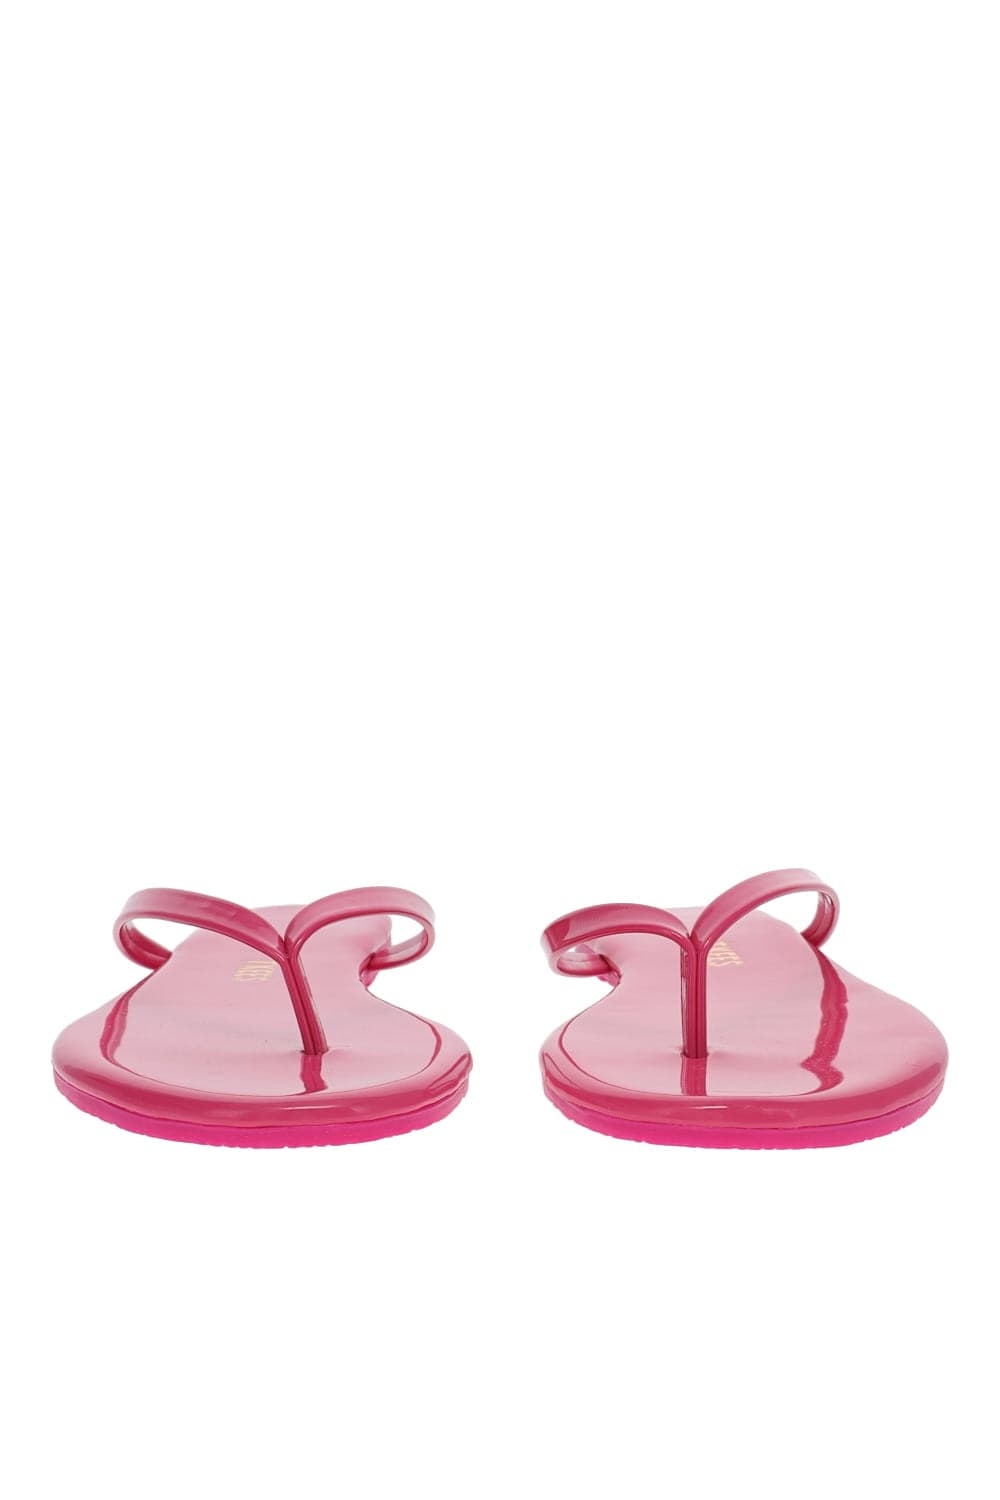 TKEES Lily Hot Pink Patent Leather Sandal